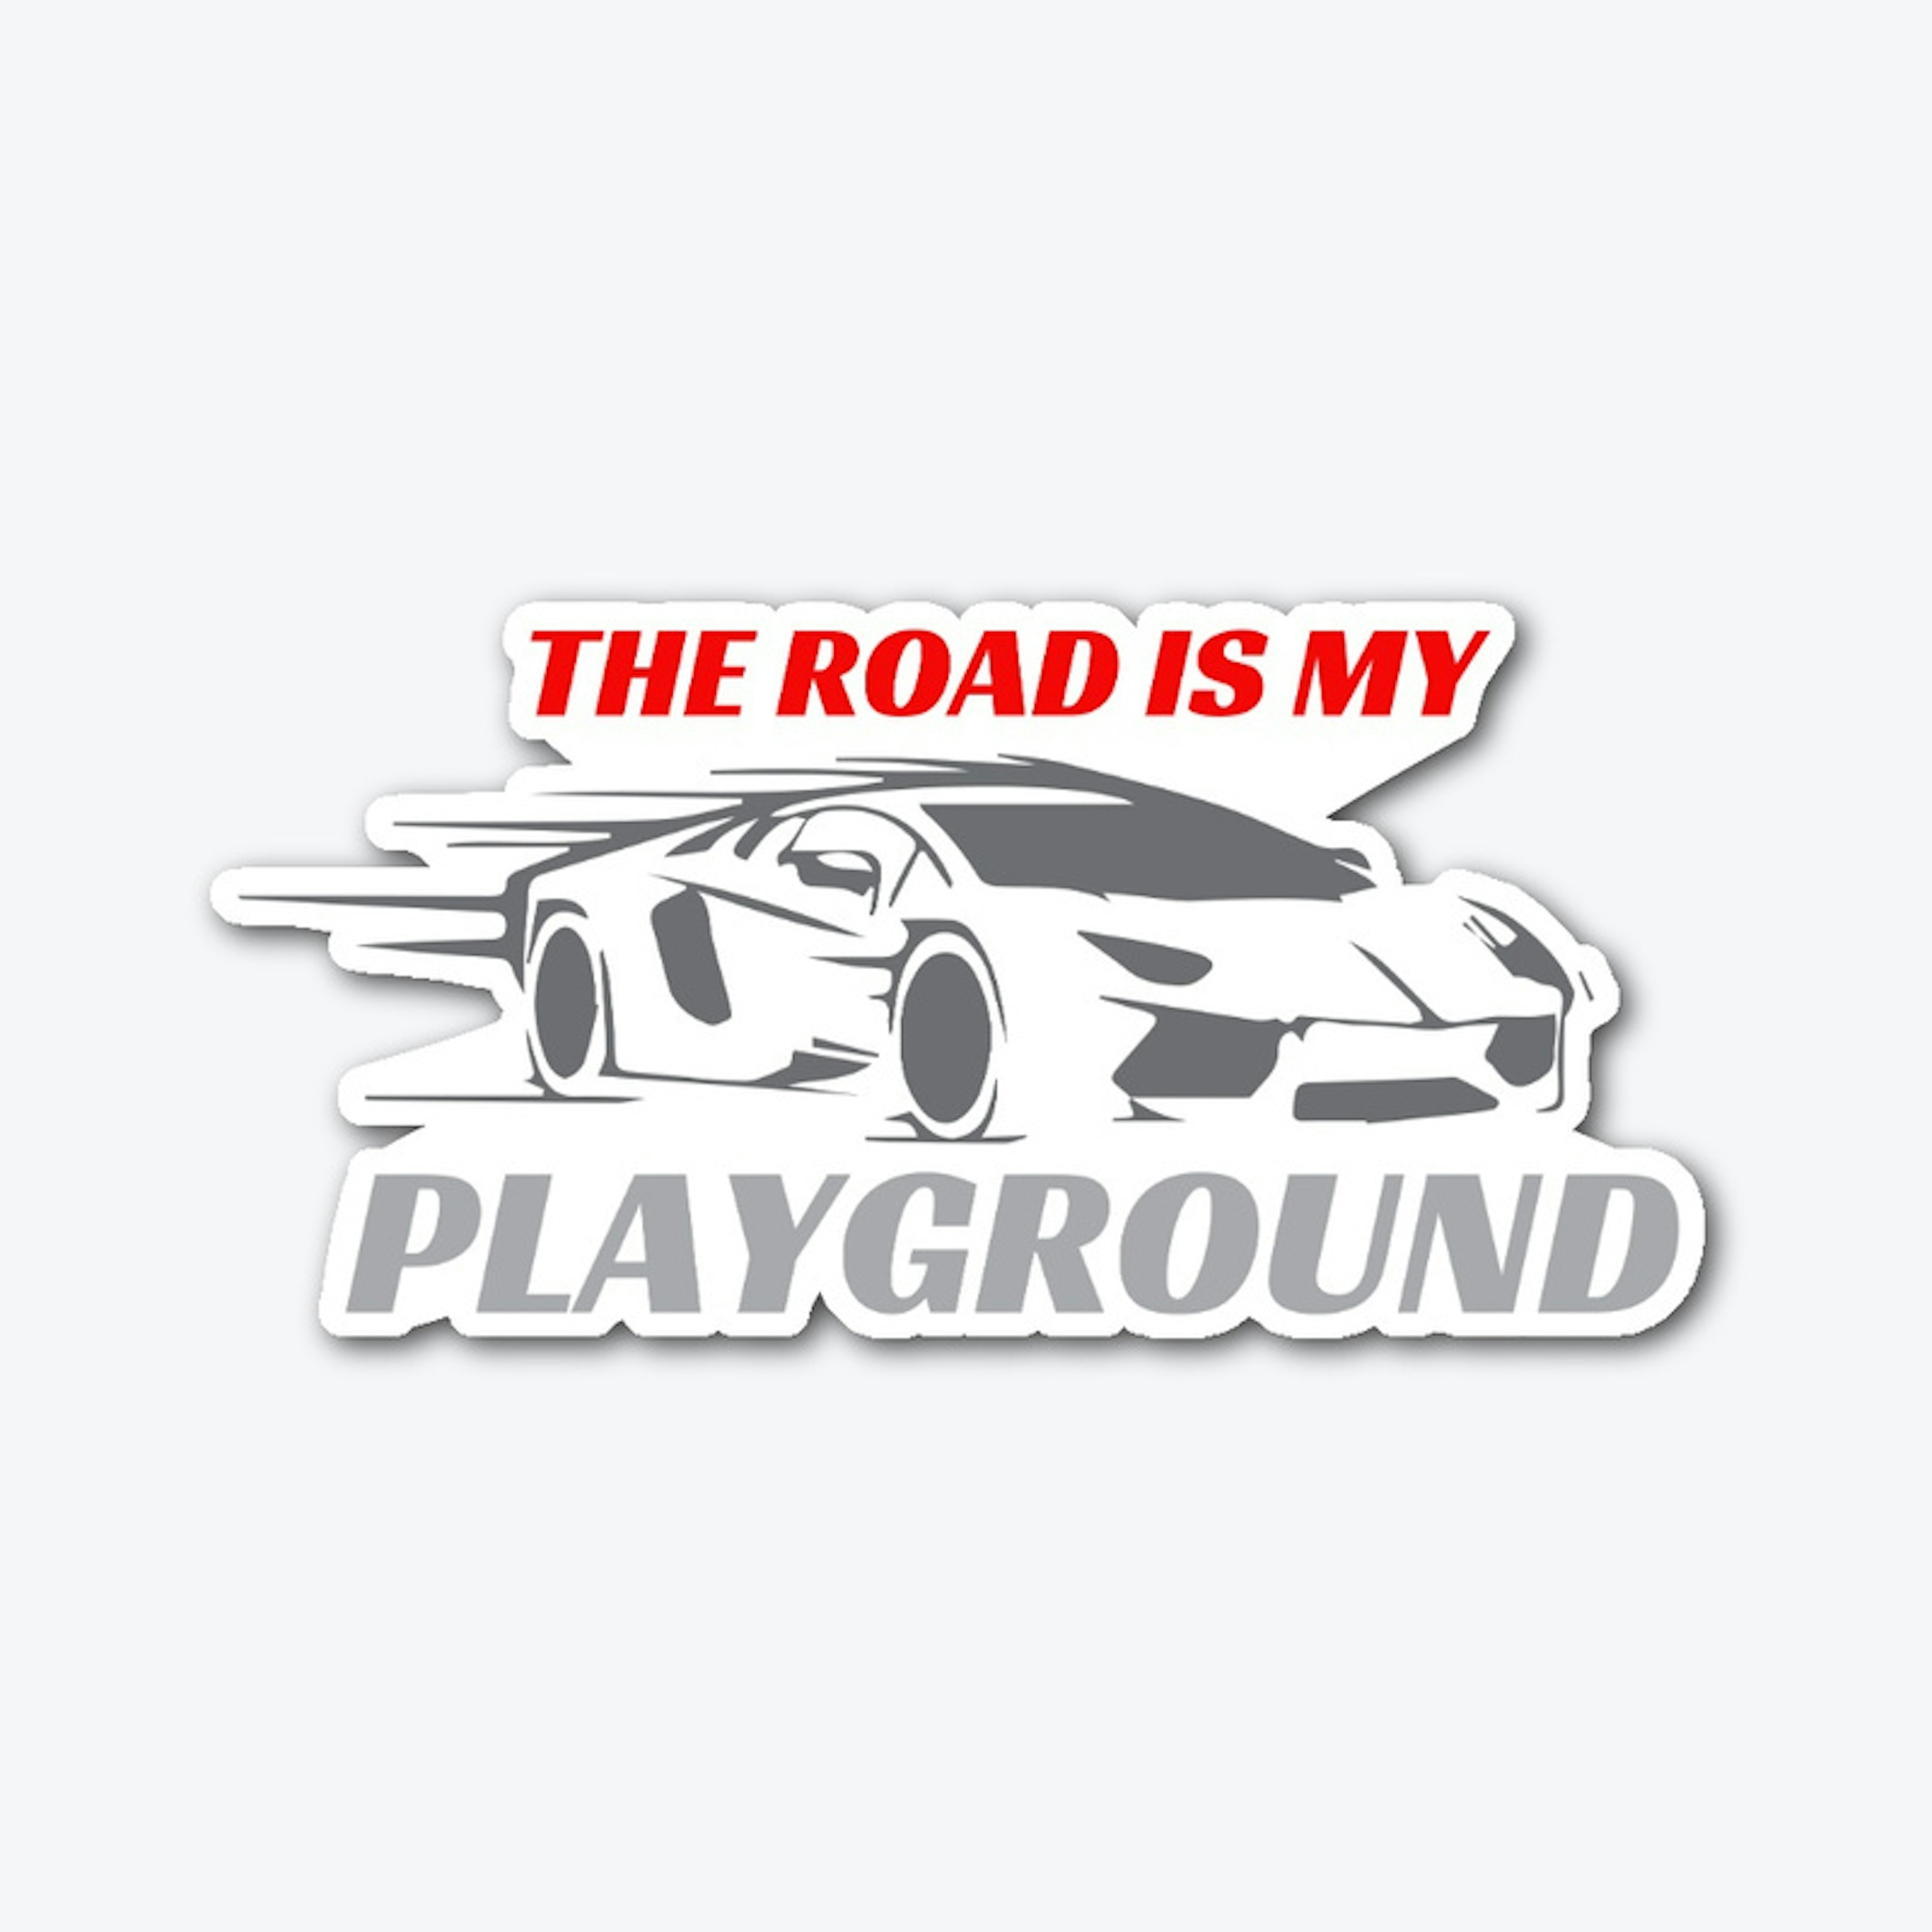 The road is my playground